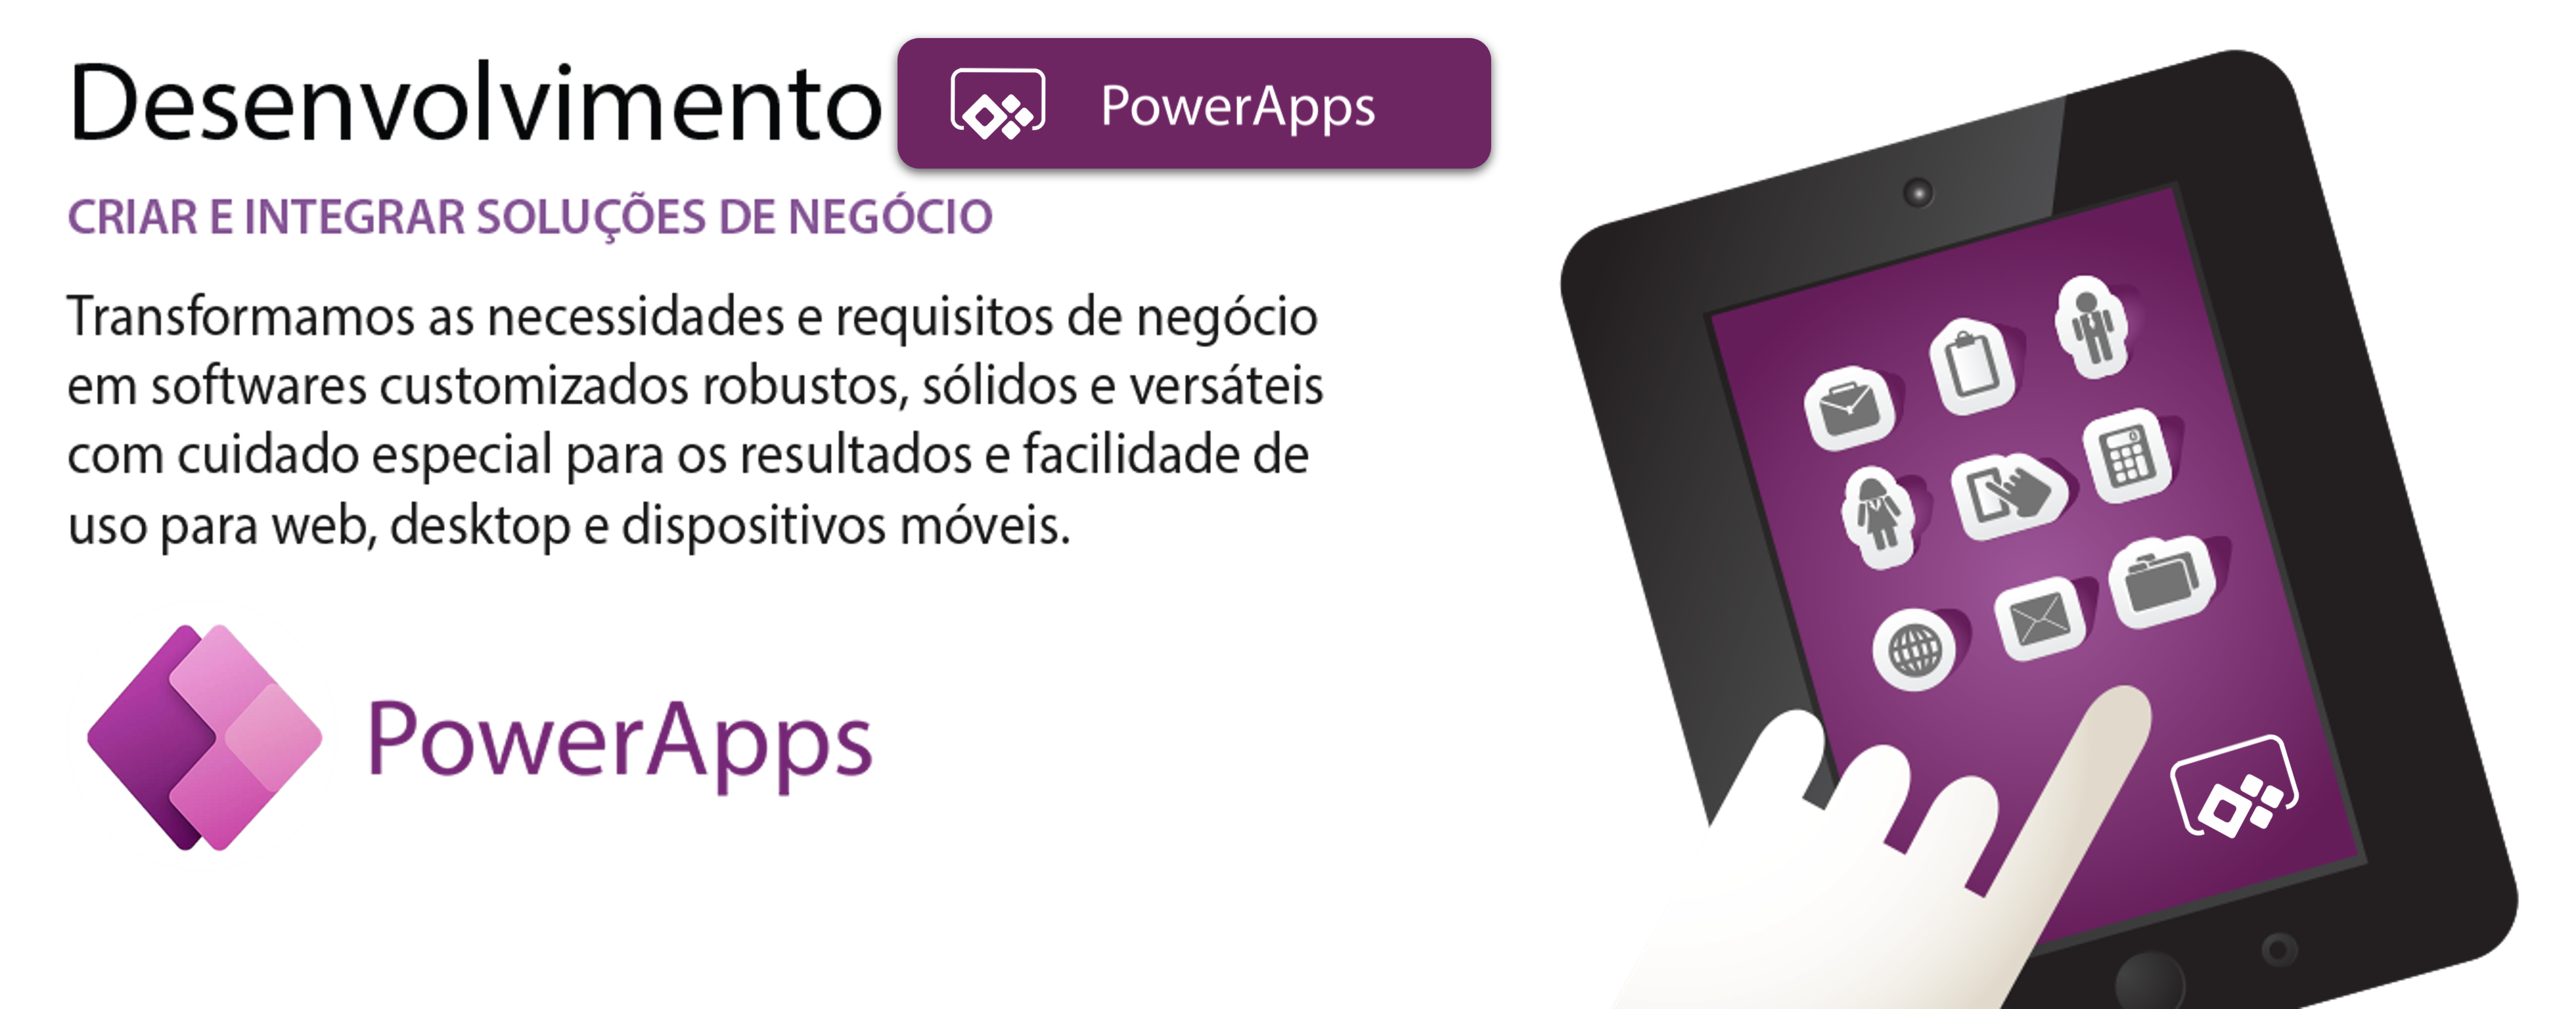 banner_powerapps2022-5.png